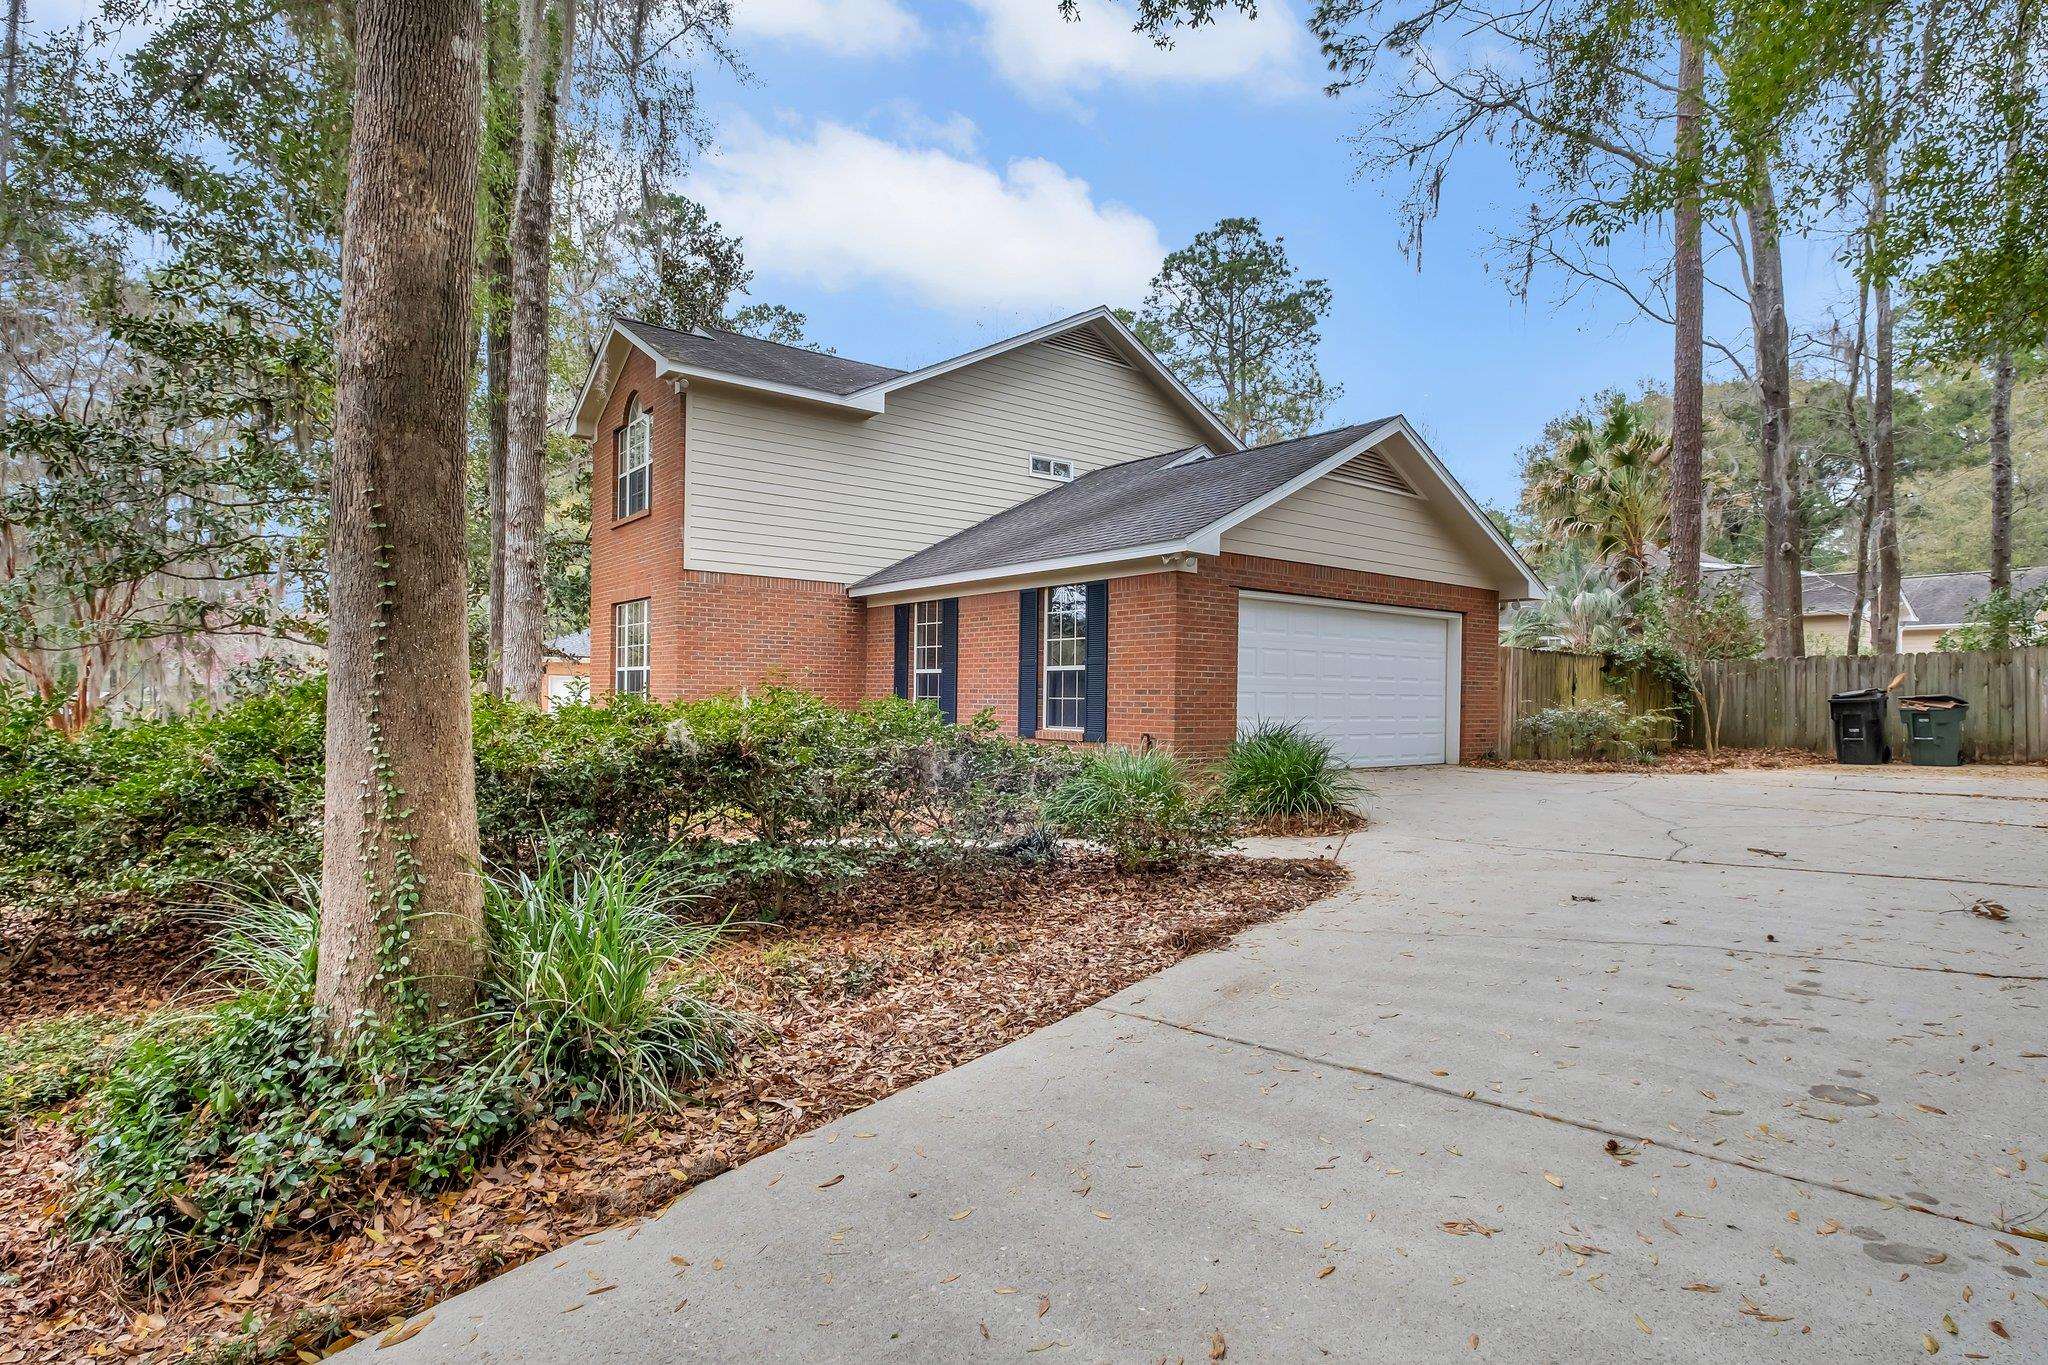 3510 Colonnade Drive,TALLAHASSEE,Florida 32309,4 Bedrooms Bedrooms,2 BathroomsBathrooms,Detached single family,3510 Colonnade Drive,369093